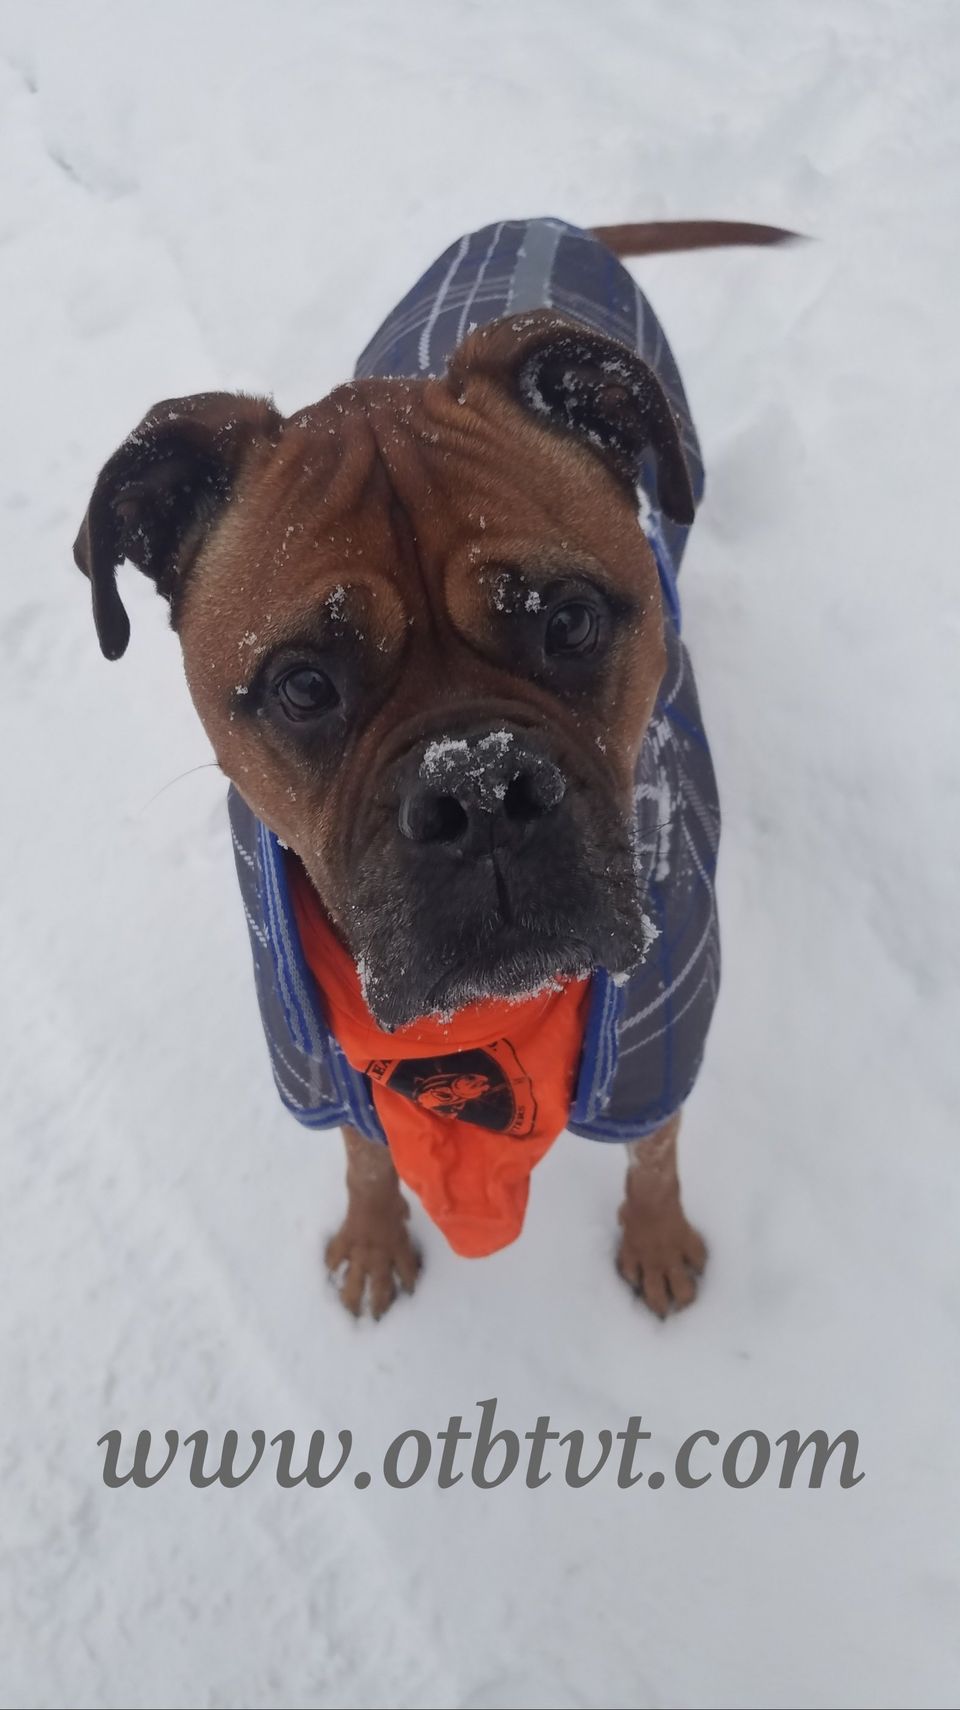 A brown dog with an orange hanker-chief wearing a blue and gray blanket